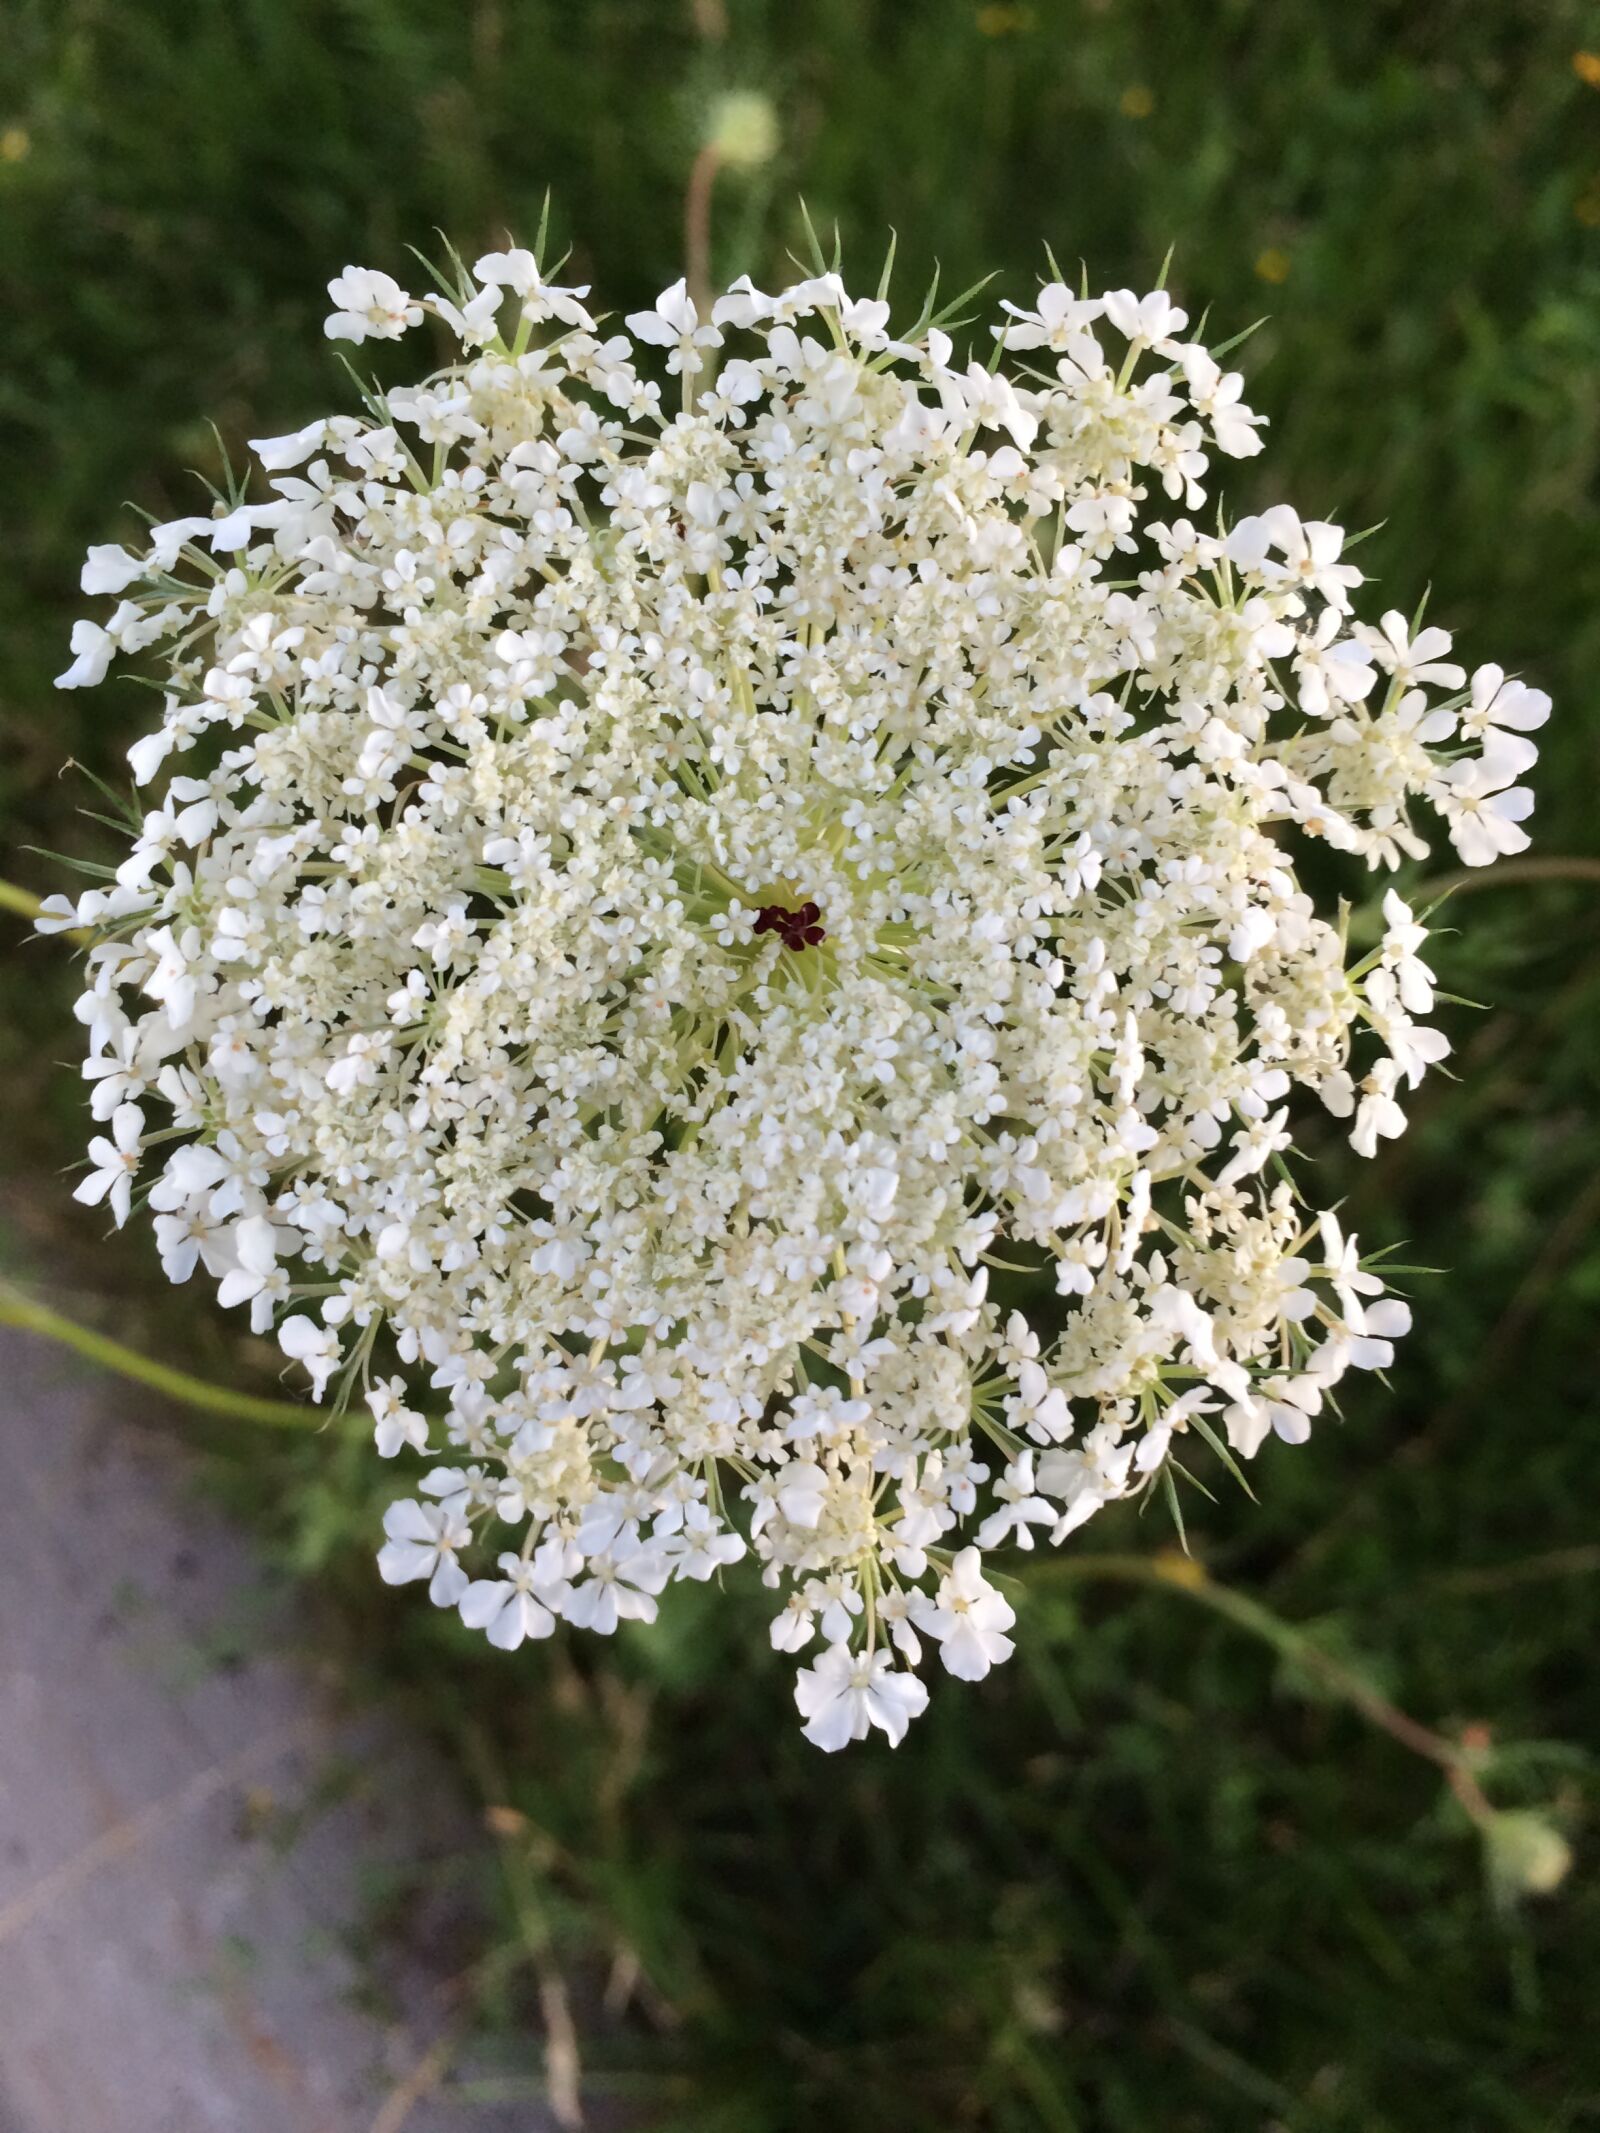 Apple iPhone 5s sample photo. Queen anne's lace, carrot photography